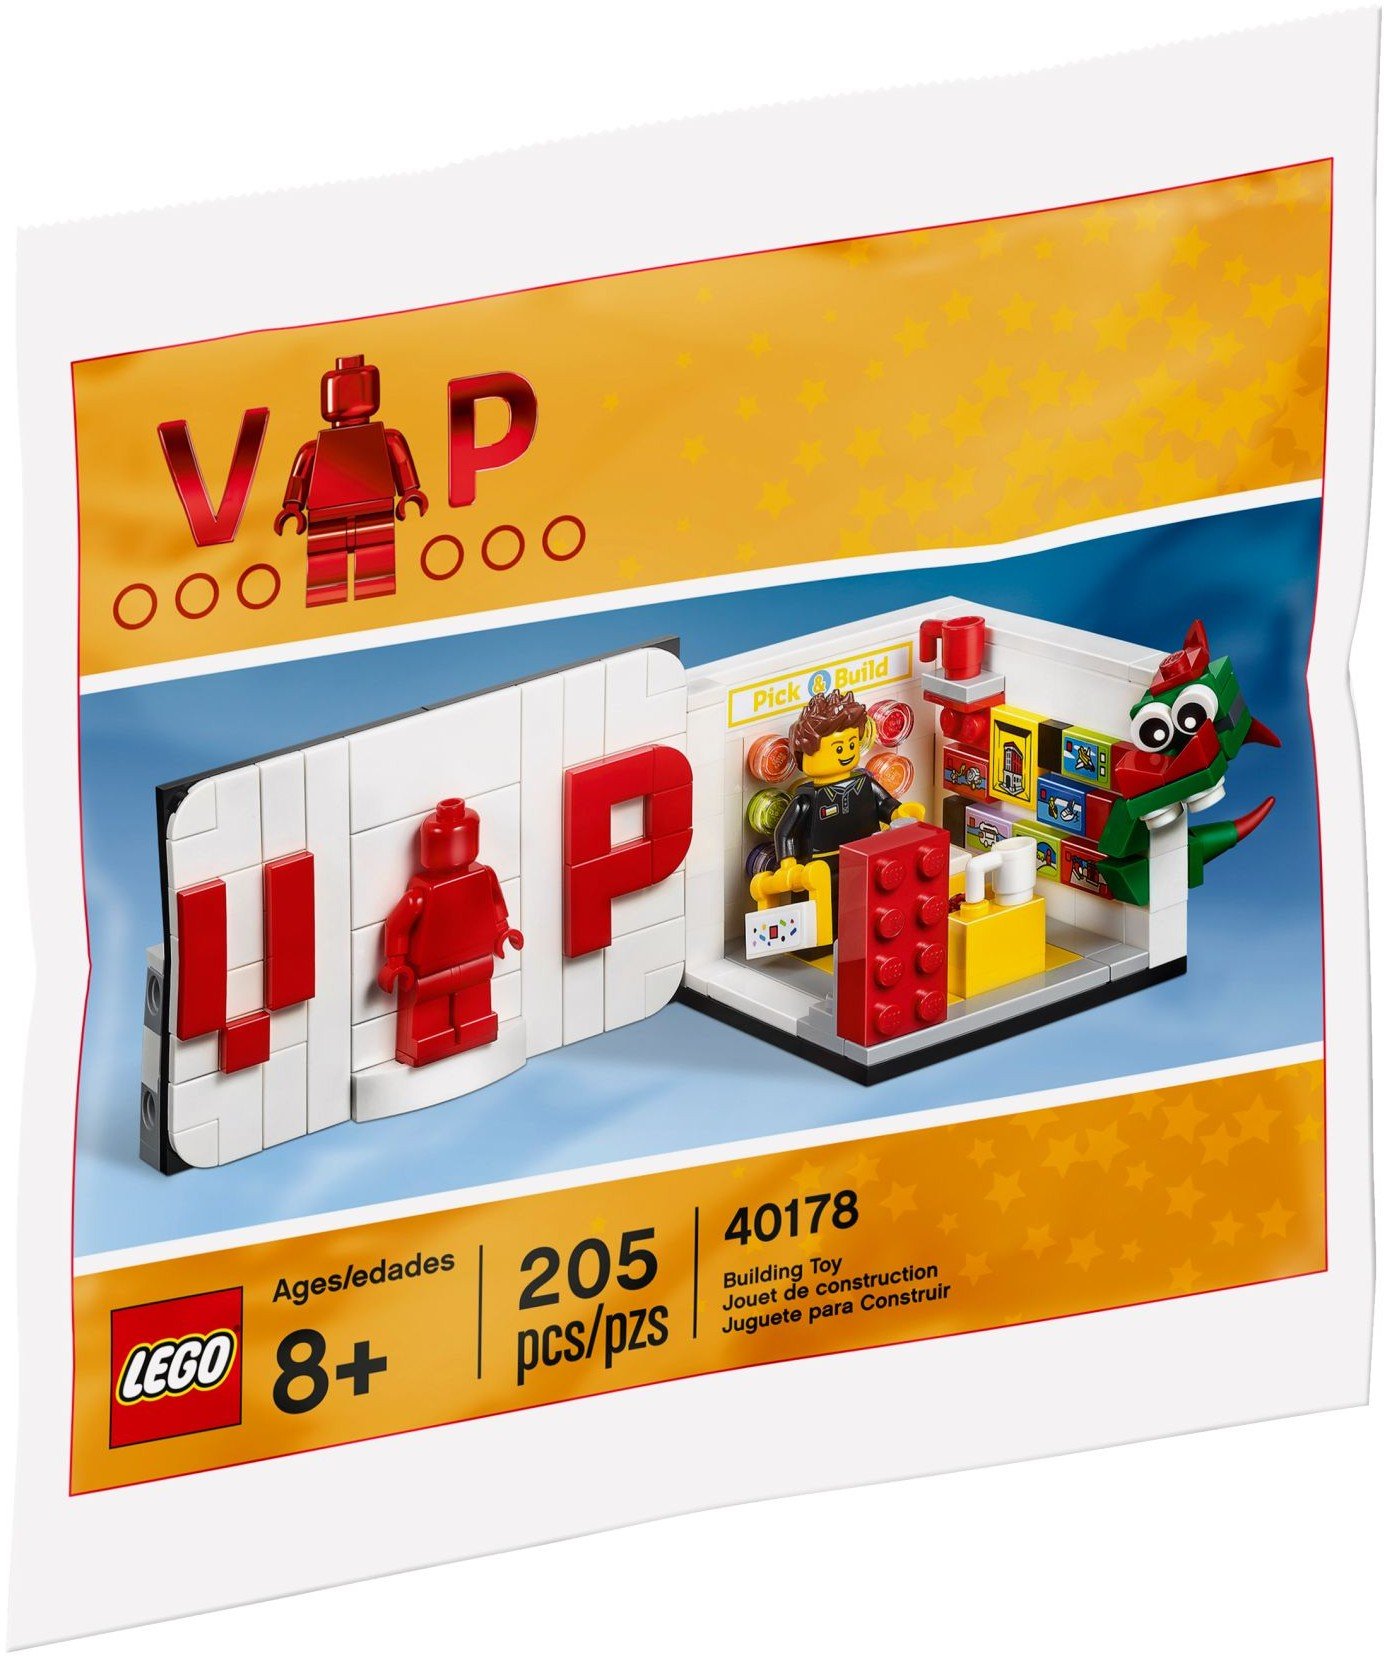 GWP: 40528 LEGO Retail Store [Hands On Review]